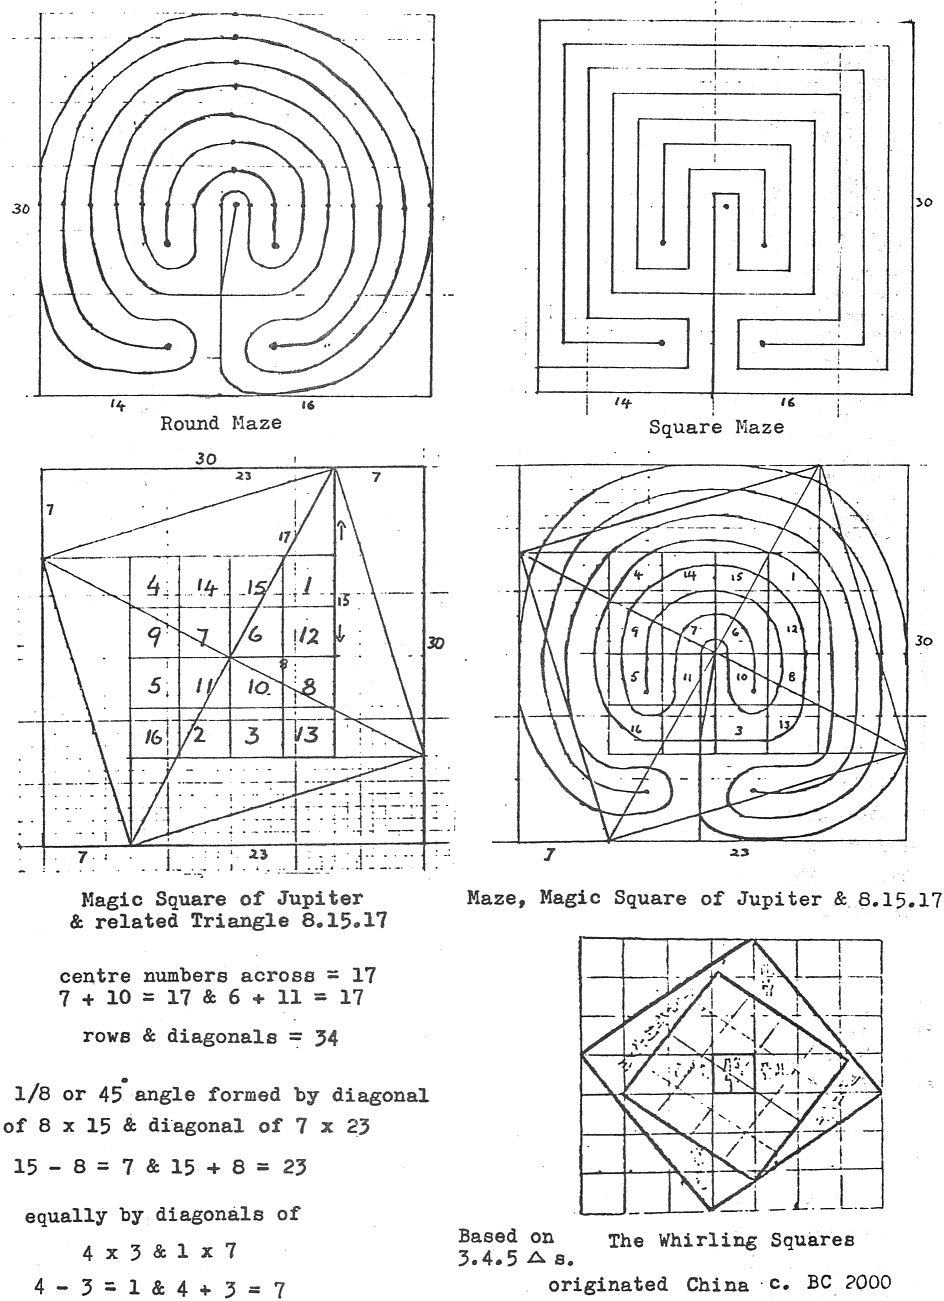 Chinese diagram of whirling squares